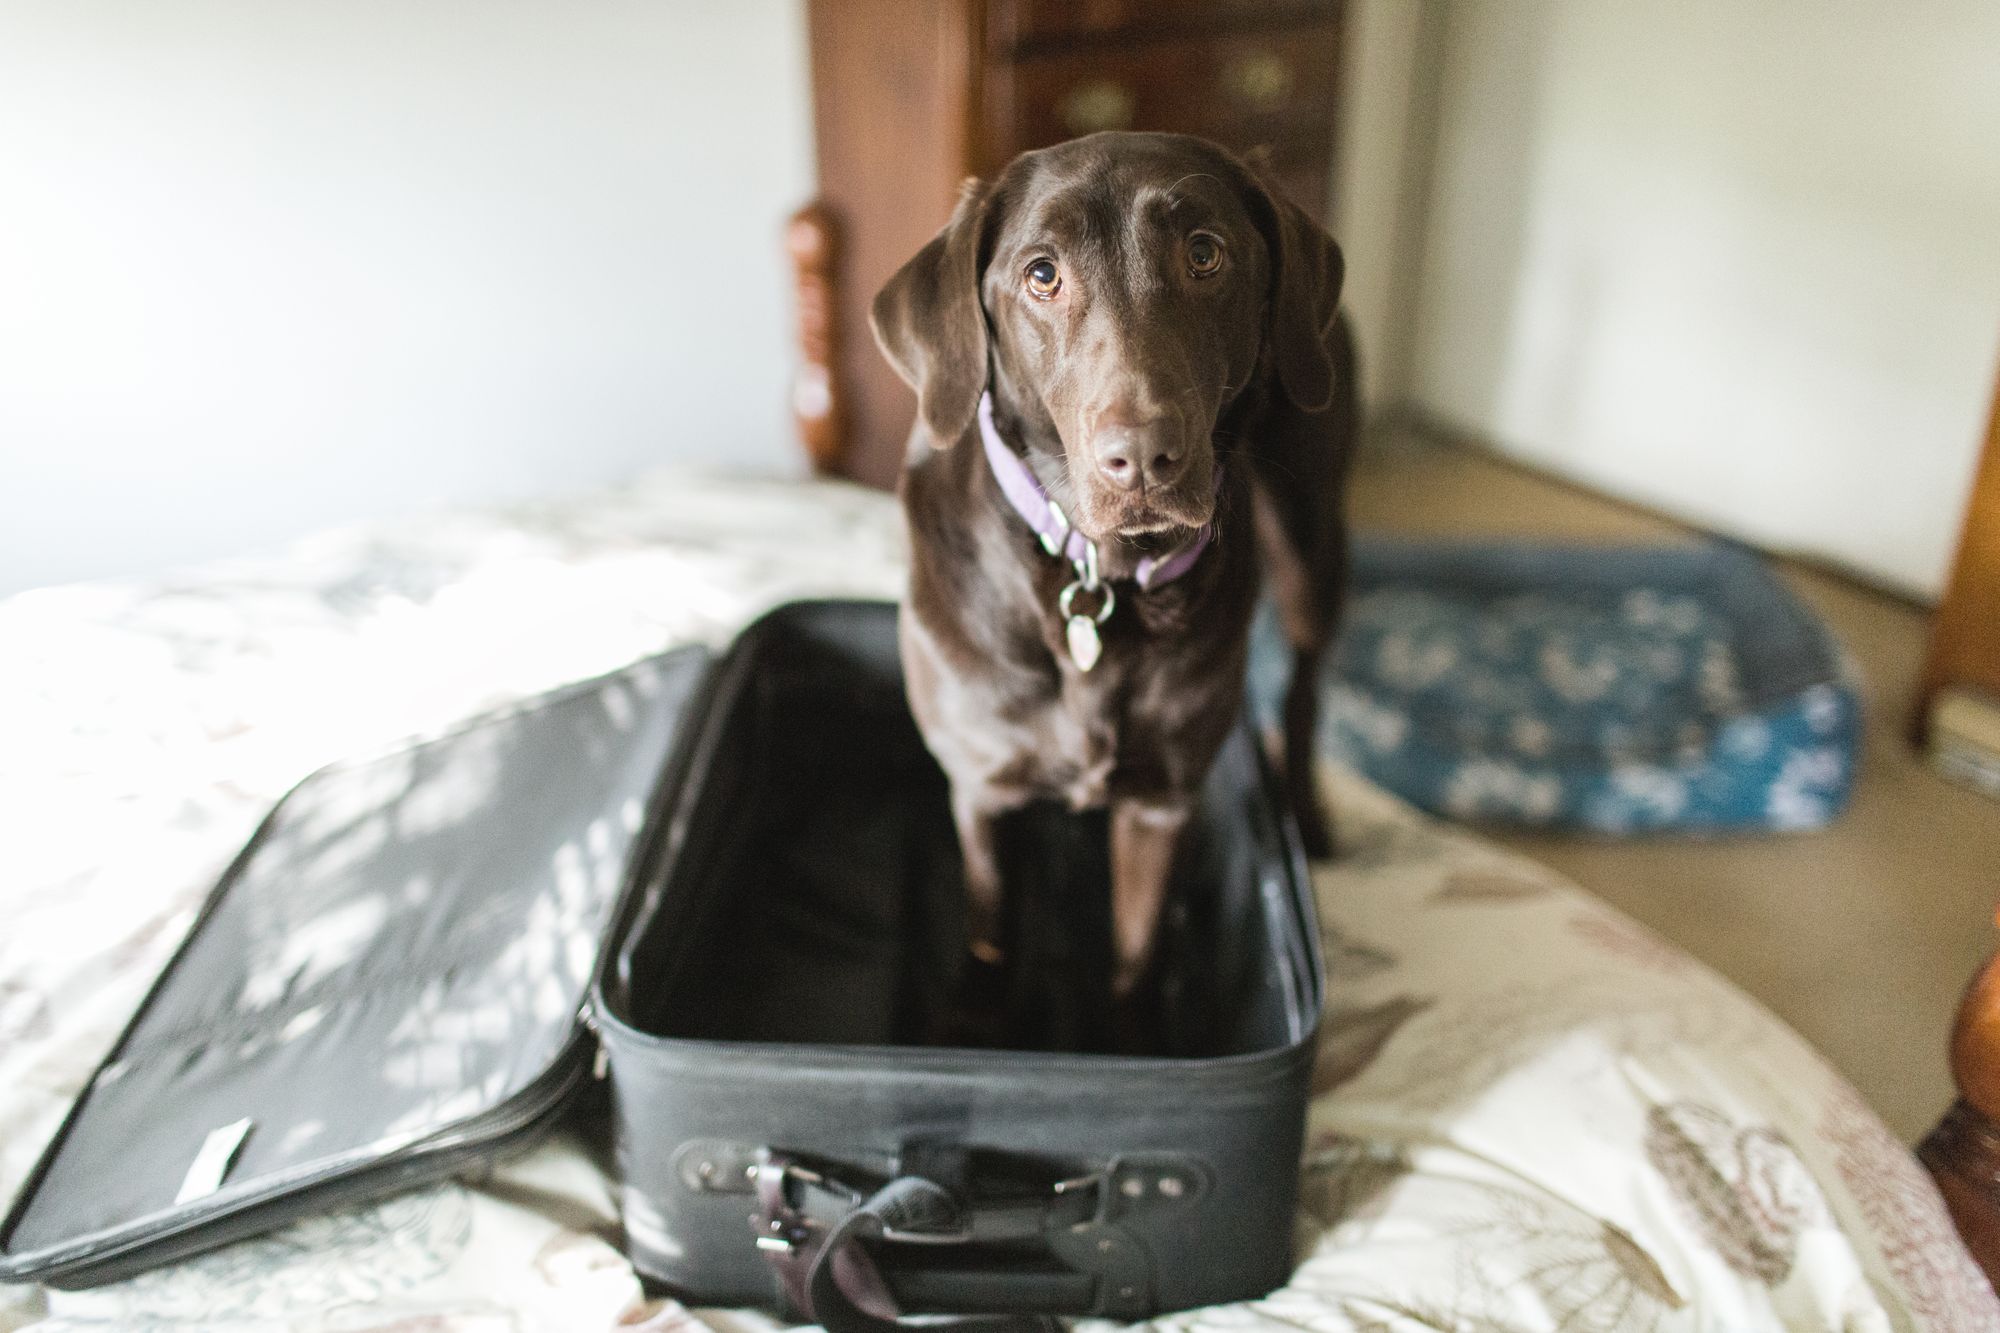 Tips for traveling with a service animal